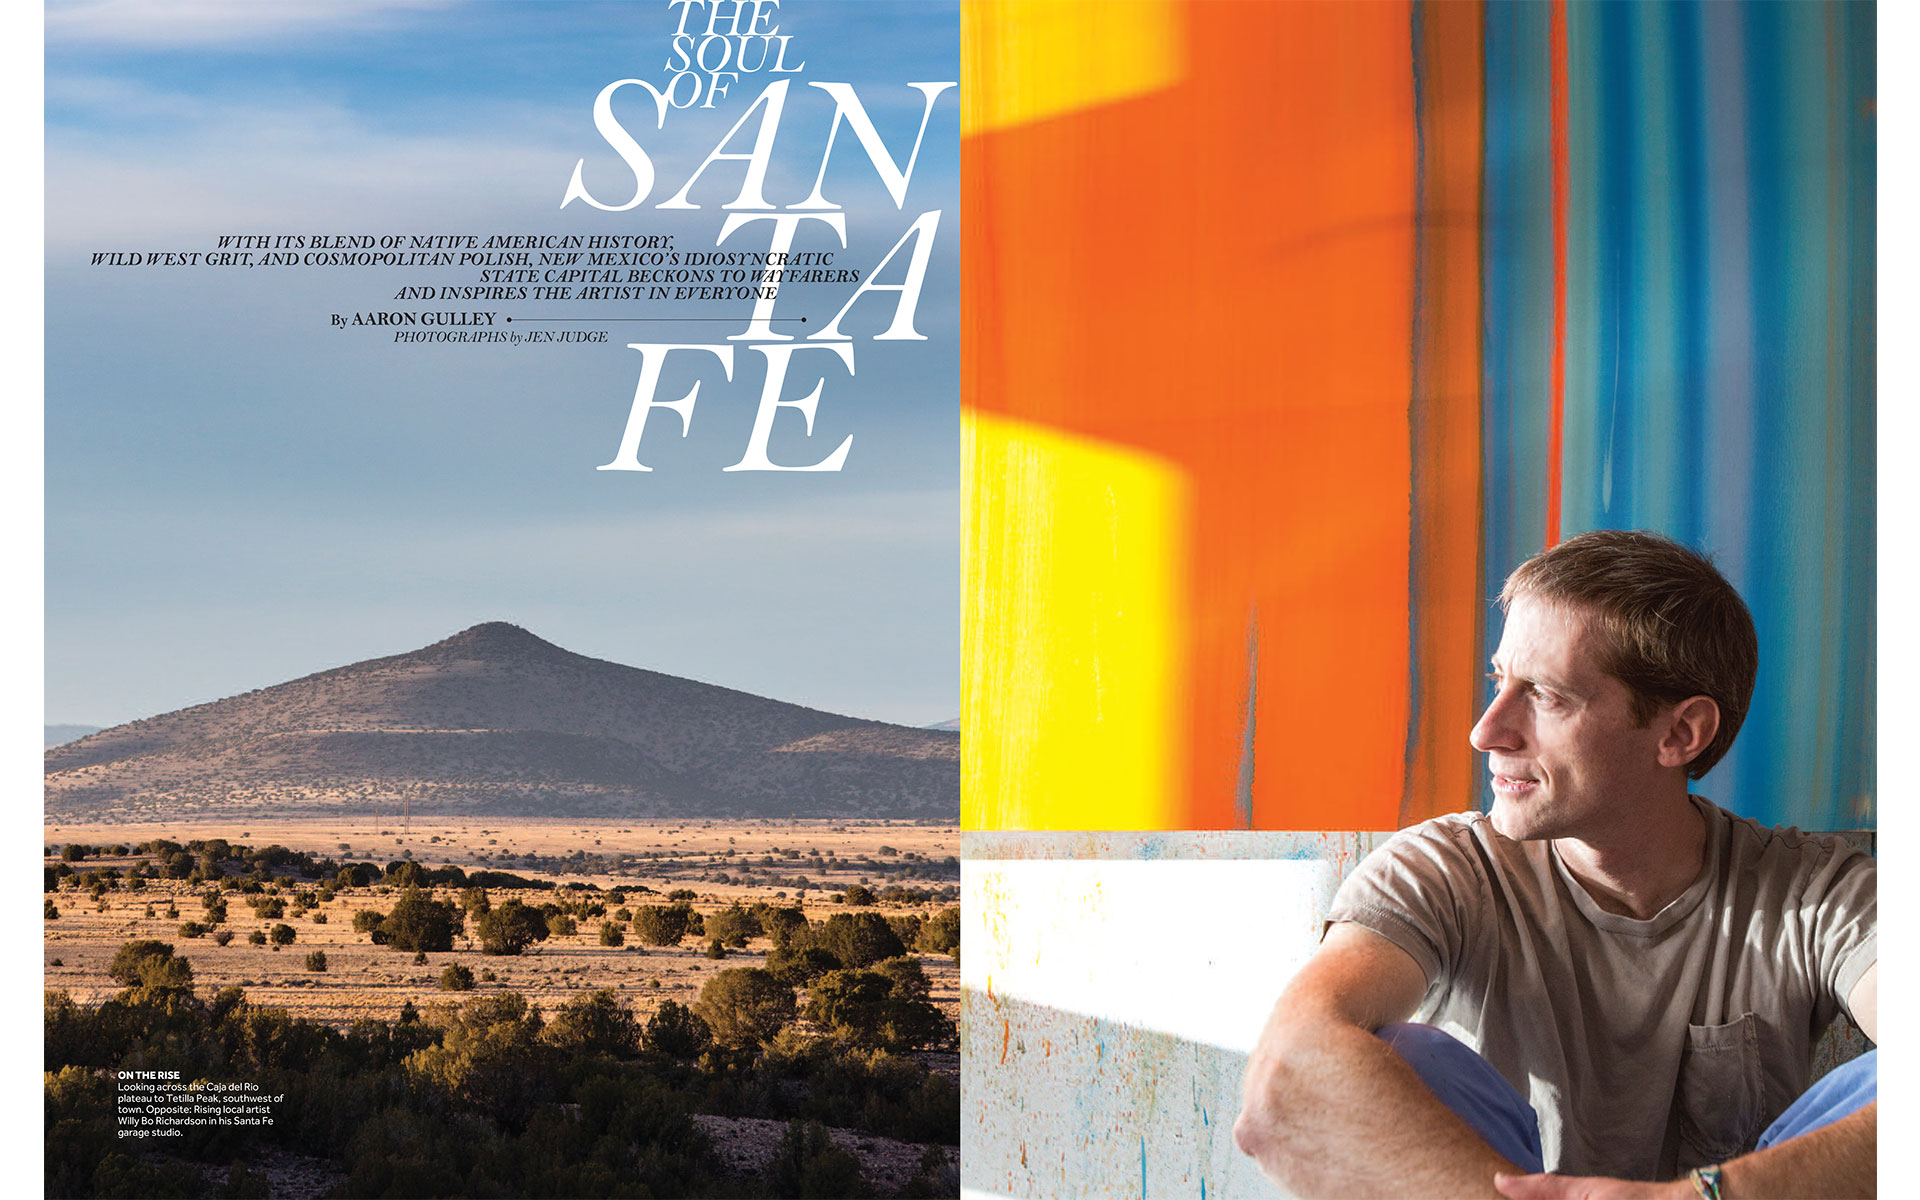 <p style="text-align: center;"><b><font color="2a2871">The Soul Of Santa Fe, DestinAsian, February 2013</font></b>
</p>
With its blend of Native American history, Wild West grit, and cosmopolitan polish, New Mexico's idiosyncratic state capital beckons to wayfarers and inspires the artist in everyone.
<p style="text-align: center;"><a href="/users/AaronGulley18670/DA_SantaFe_2-13.pdf" onclick="window.open(this.href, '', 'resizable=no,status=no,location=no,toolbar=no,menubar=no,fullscreen=no,scrollbars=no,dependent=no,width=900'); return false;">Read the Story</a></p>